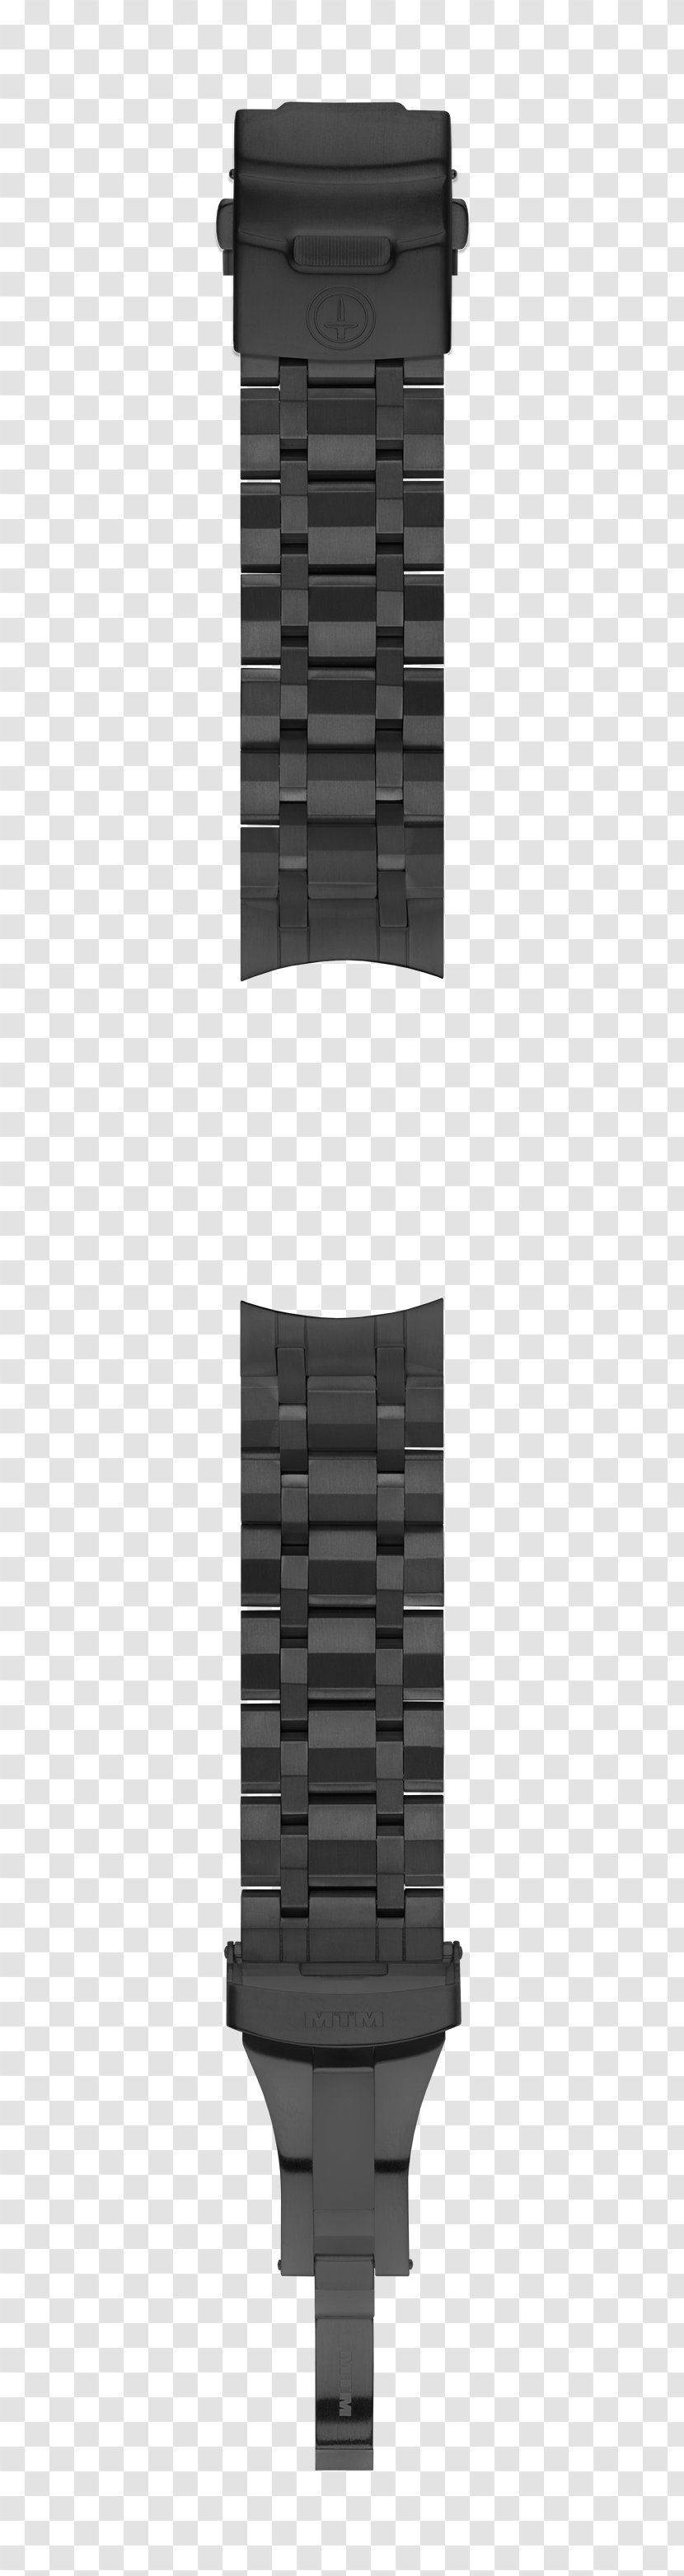 Black Vulture Military Watch Special Forces - Structure - Swatch Transparent PNG